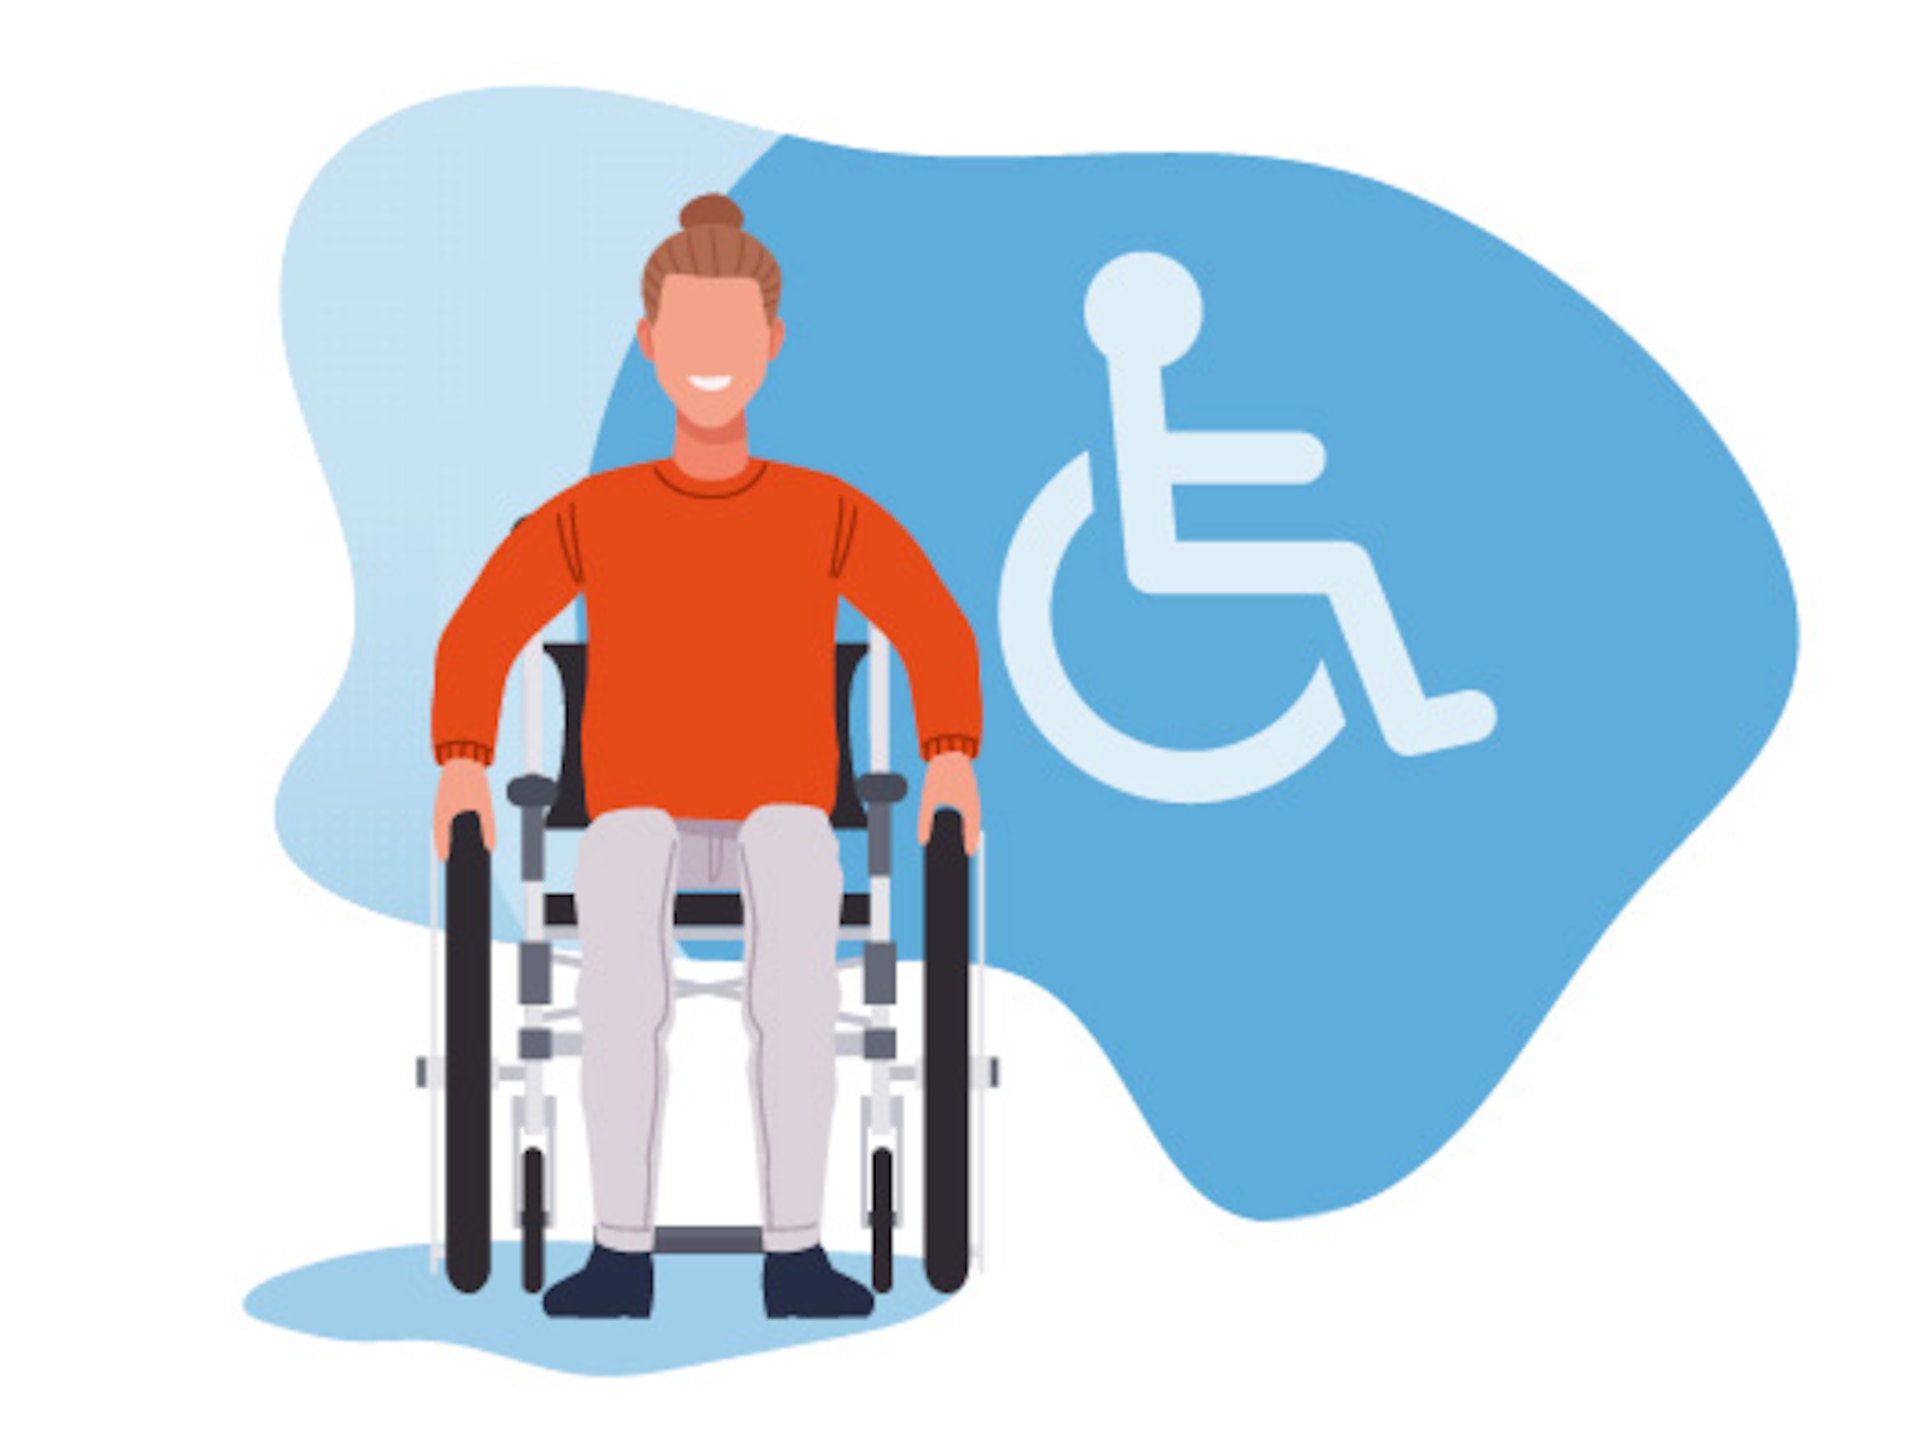 An illustration of a handicap symbol representing physical disabilities.